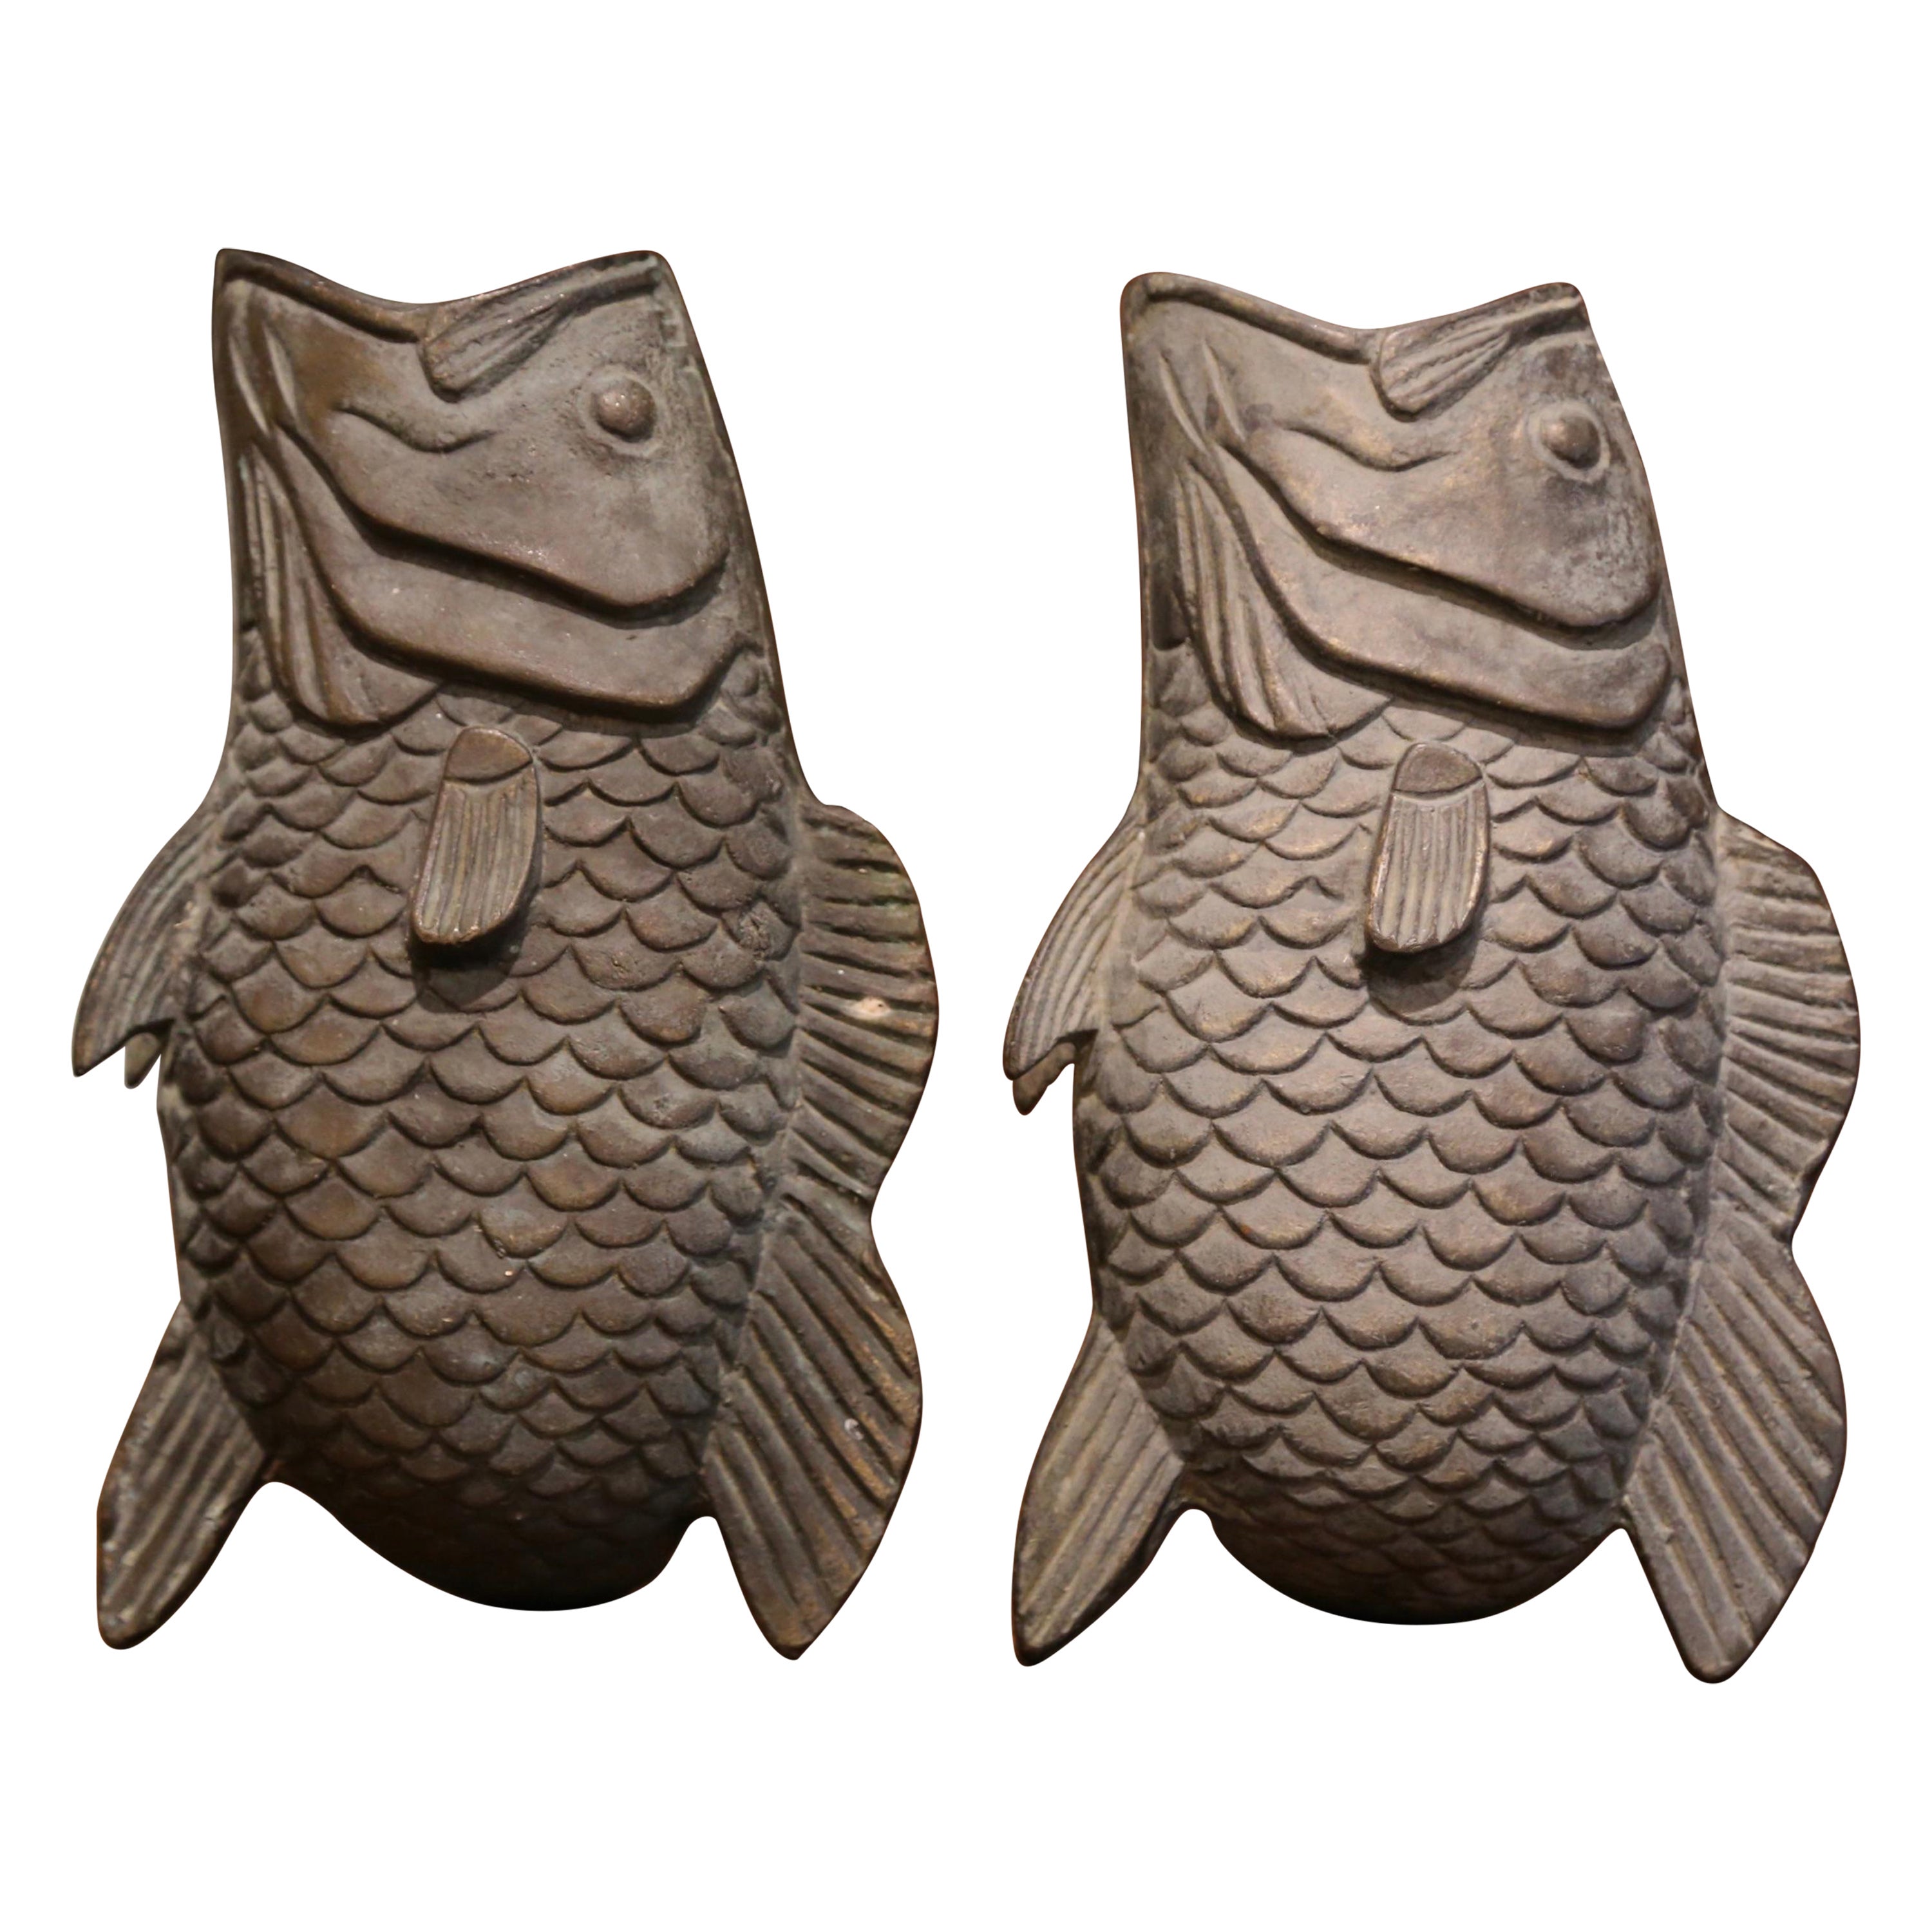 Pair of 19th Century French Carved Verdigris Patinated Bronze Fish-Form Vases For Sale